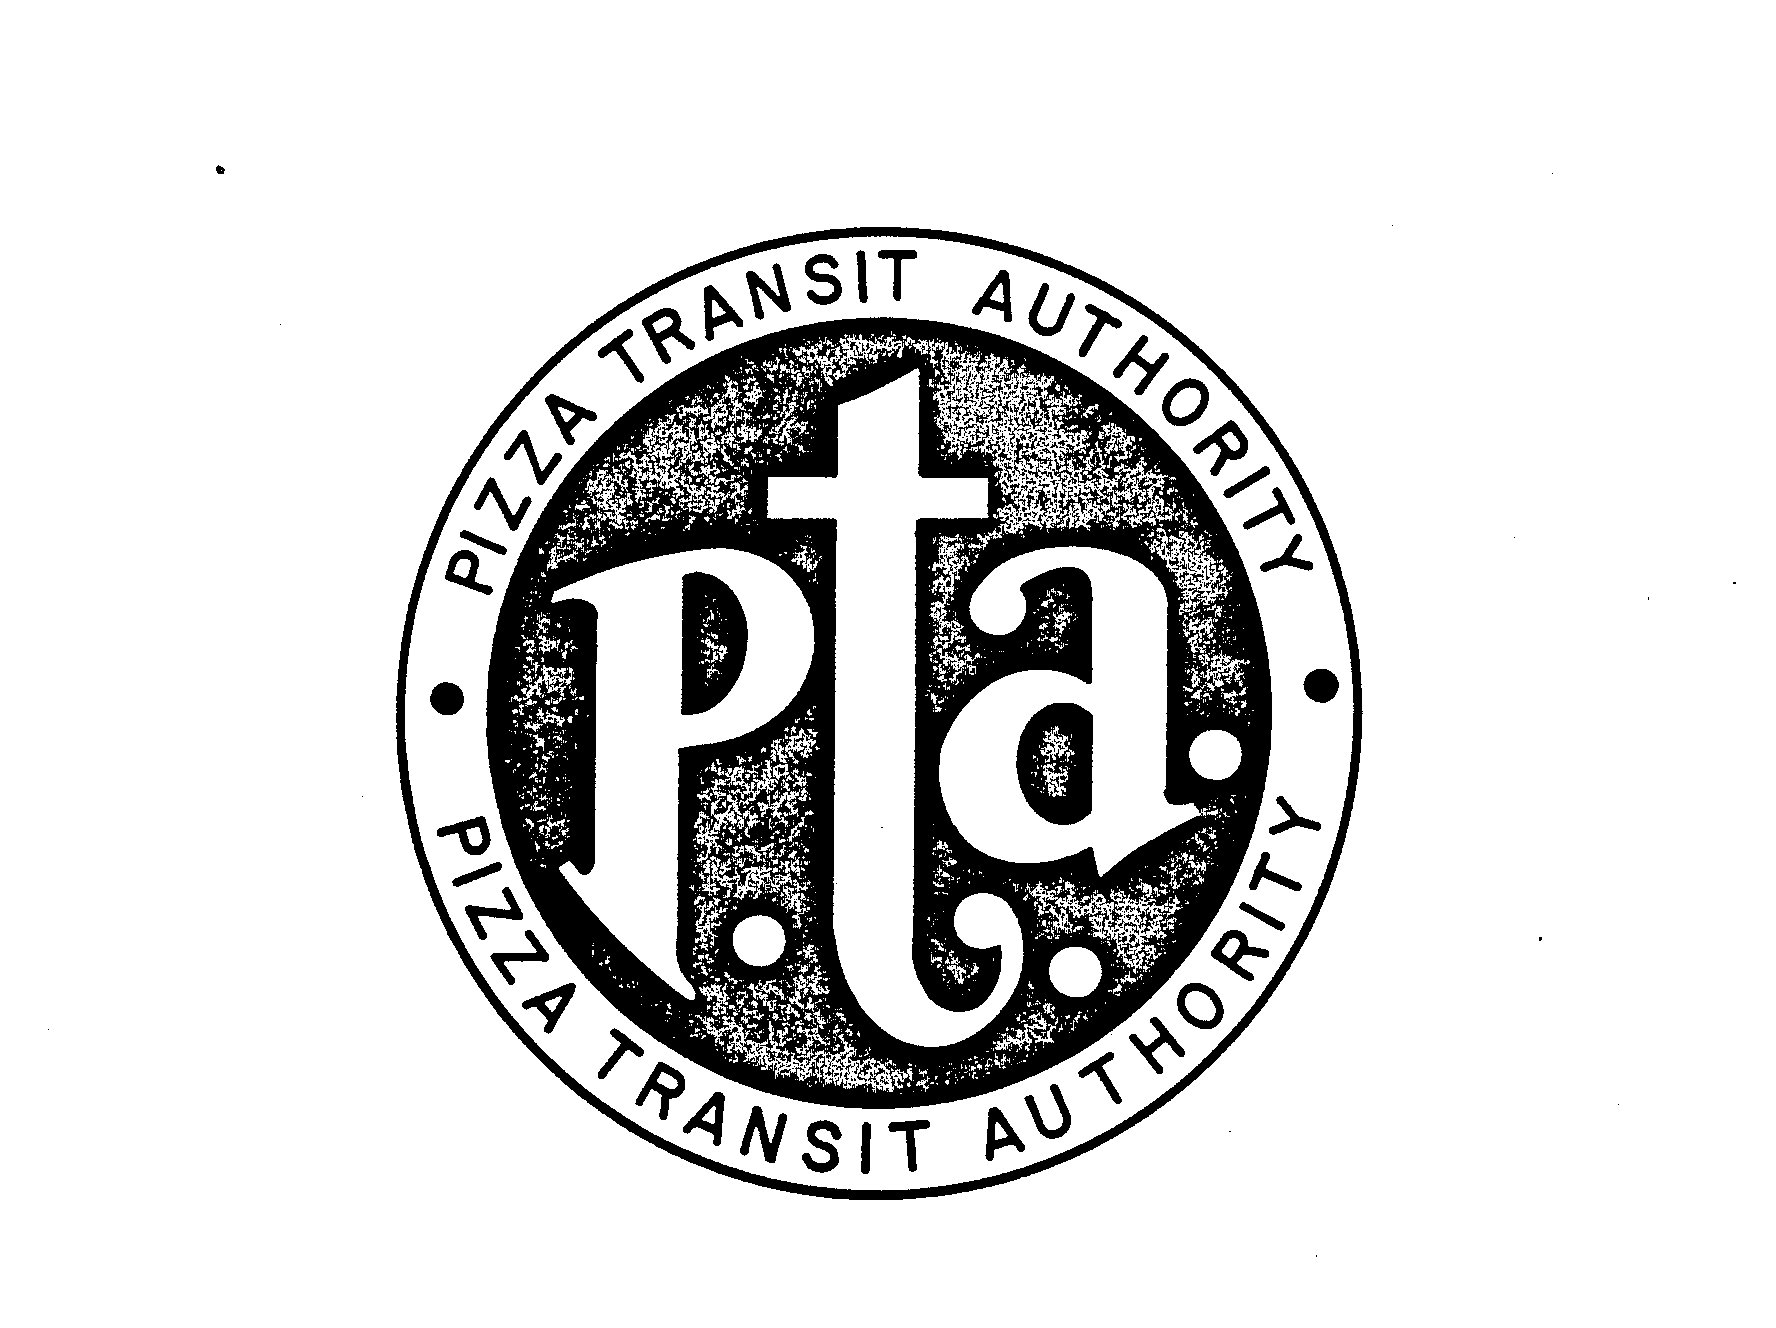  PIZZA TRANSIT AUTHORITY P.T.A. PIZZA TRANSIT AUTHORITY